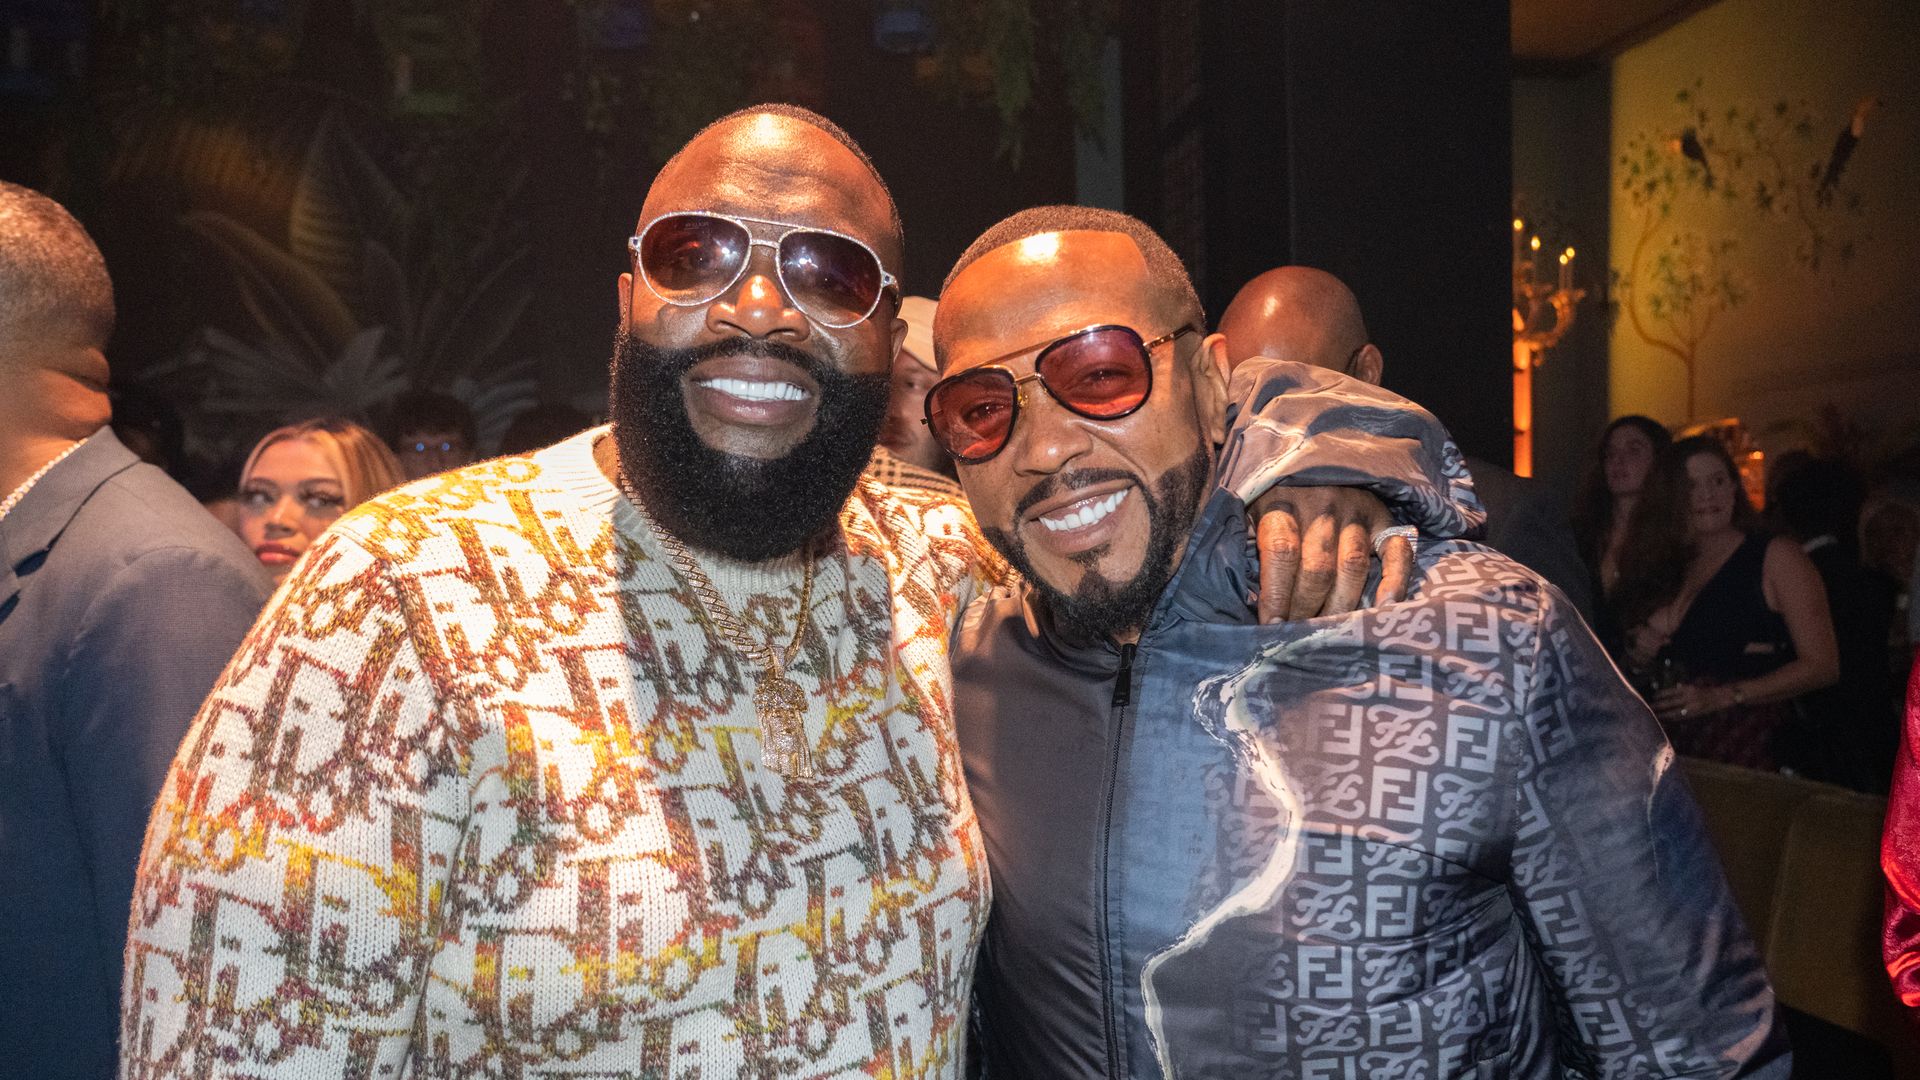 Rapper Rick Ross puts his arm around Timbaland as both men smile and wear sunglasses. 